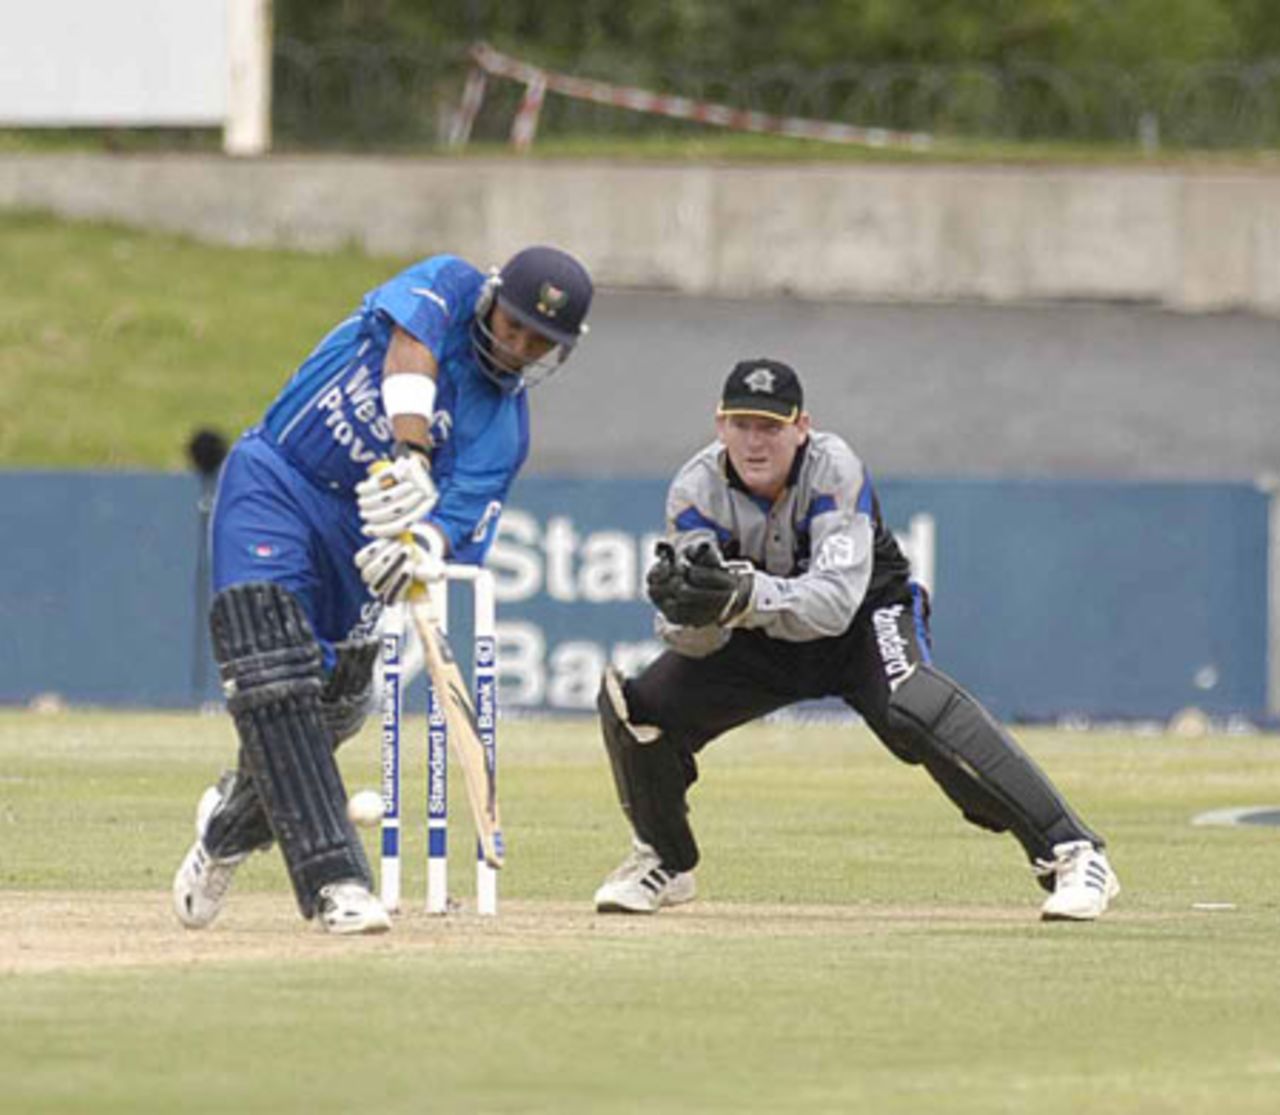 Ashwell Prince plays to leg with Boland wicketkeeper Steve Palframan looking on